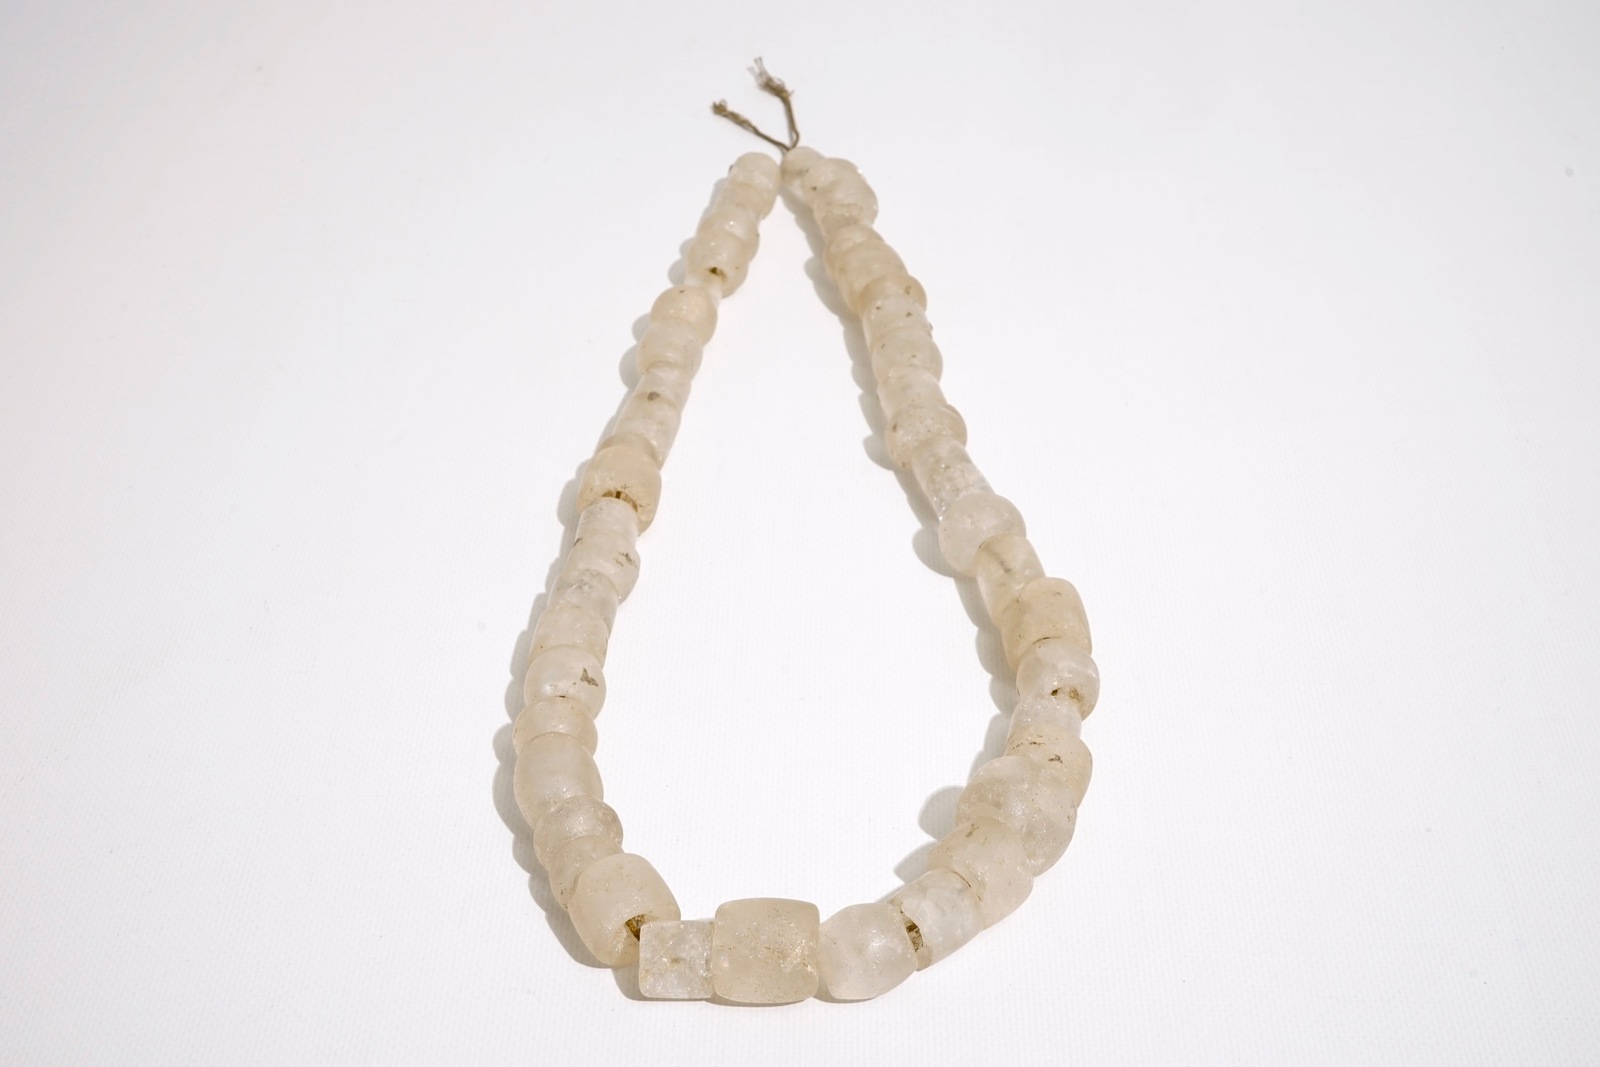 A pre-Columbian rock crystal necklace, Tairona culture carved stone pendants, Colombia, 15/10th C.